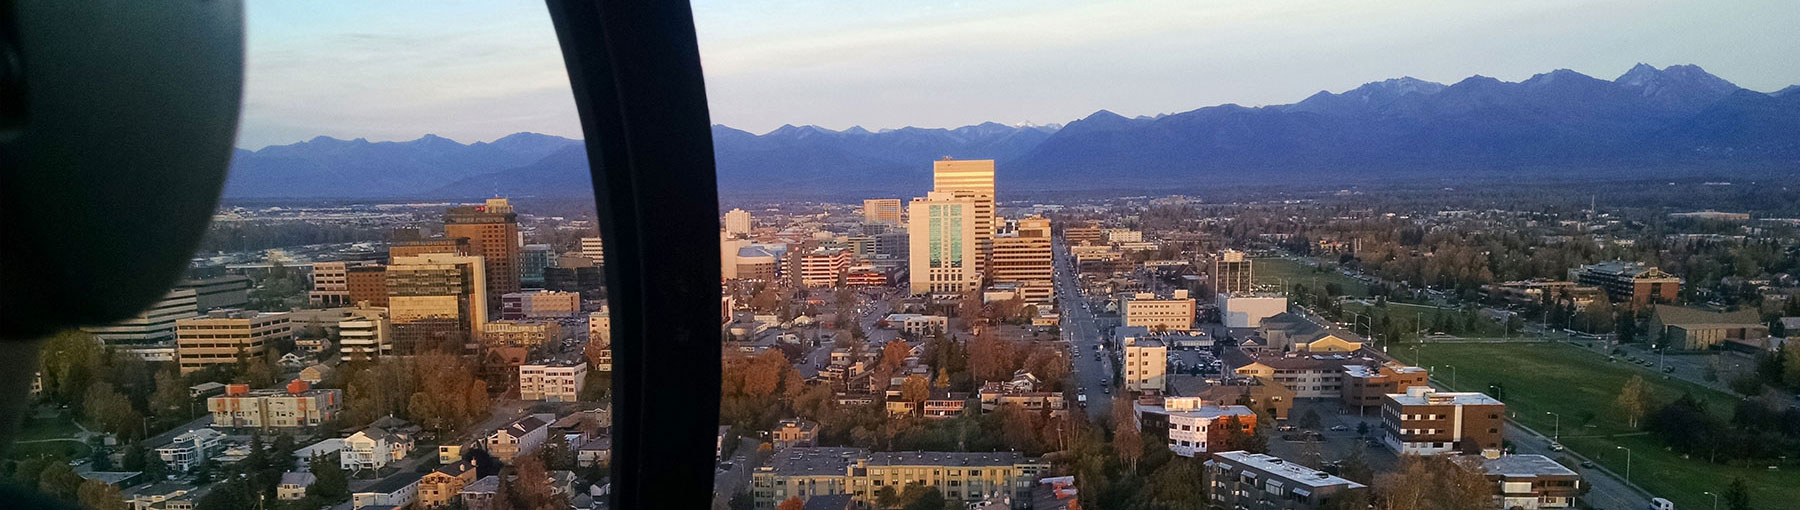 View of downtown Anchorage Alaska from helicopter cockpit.